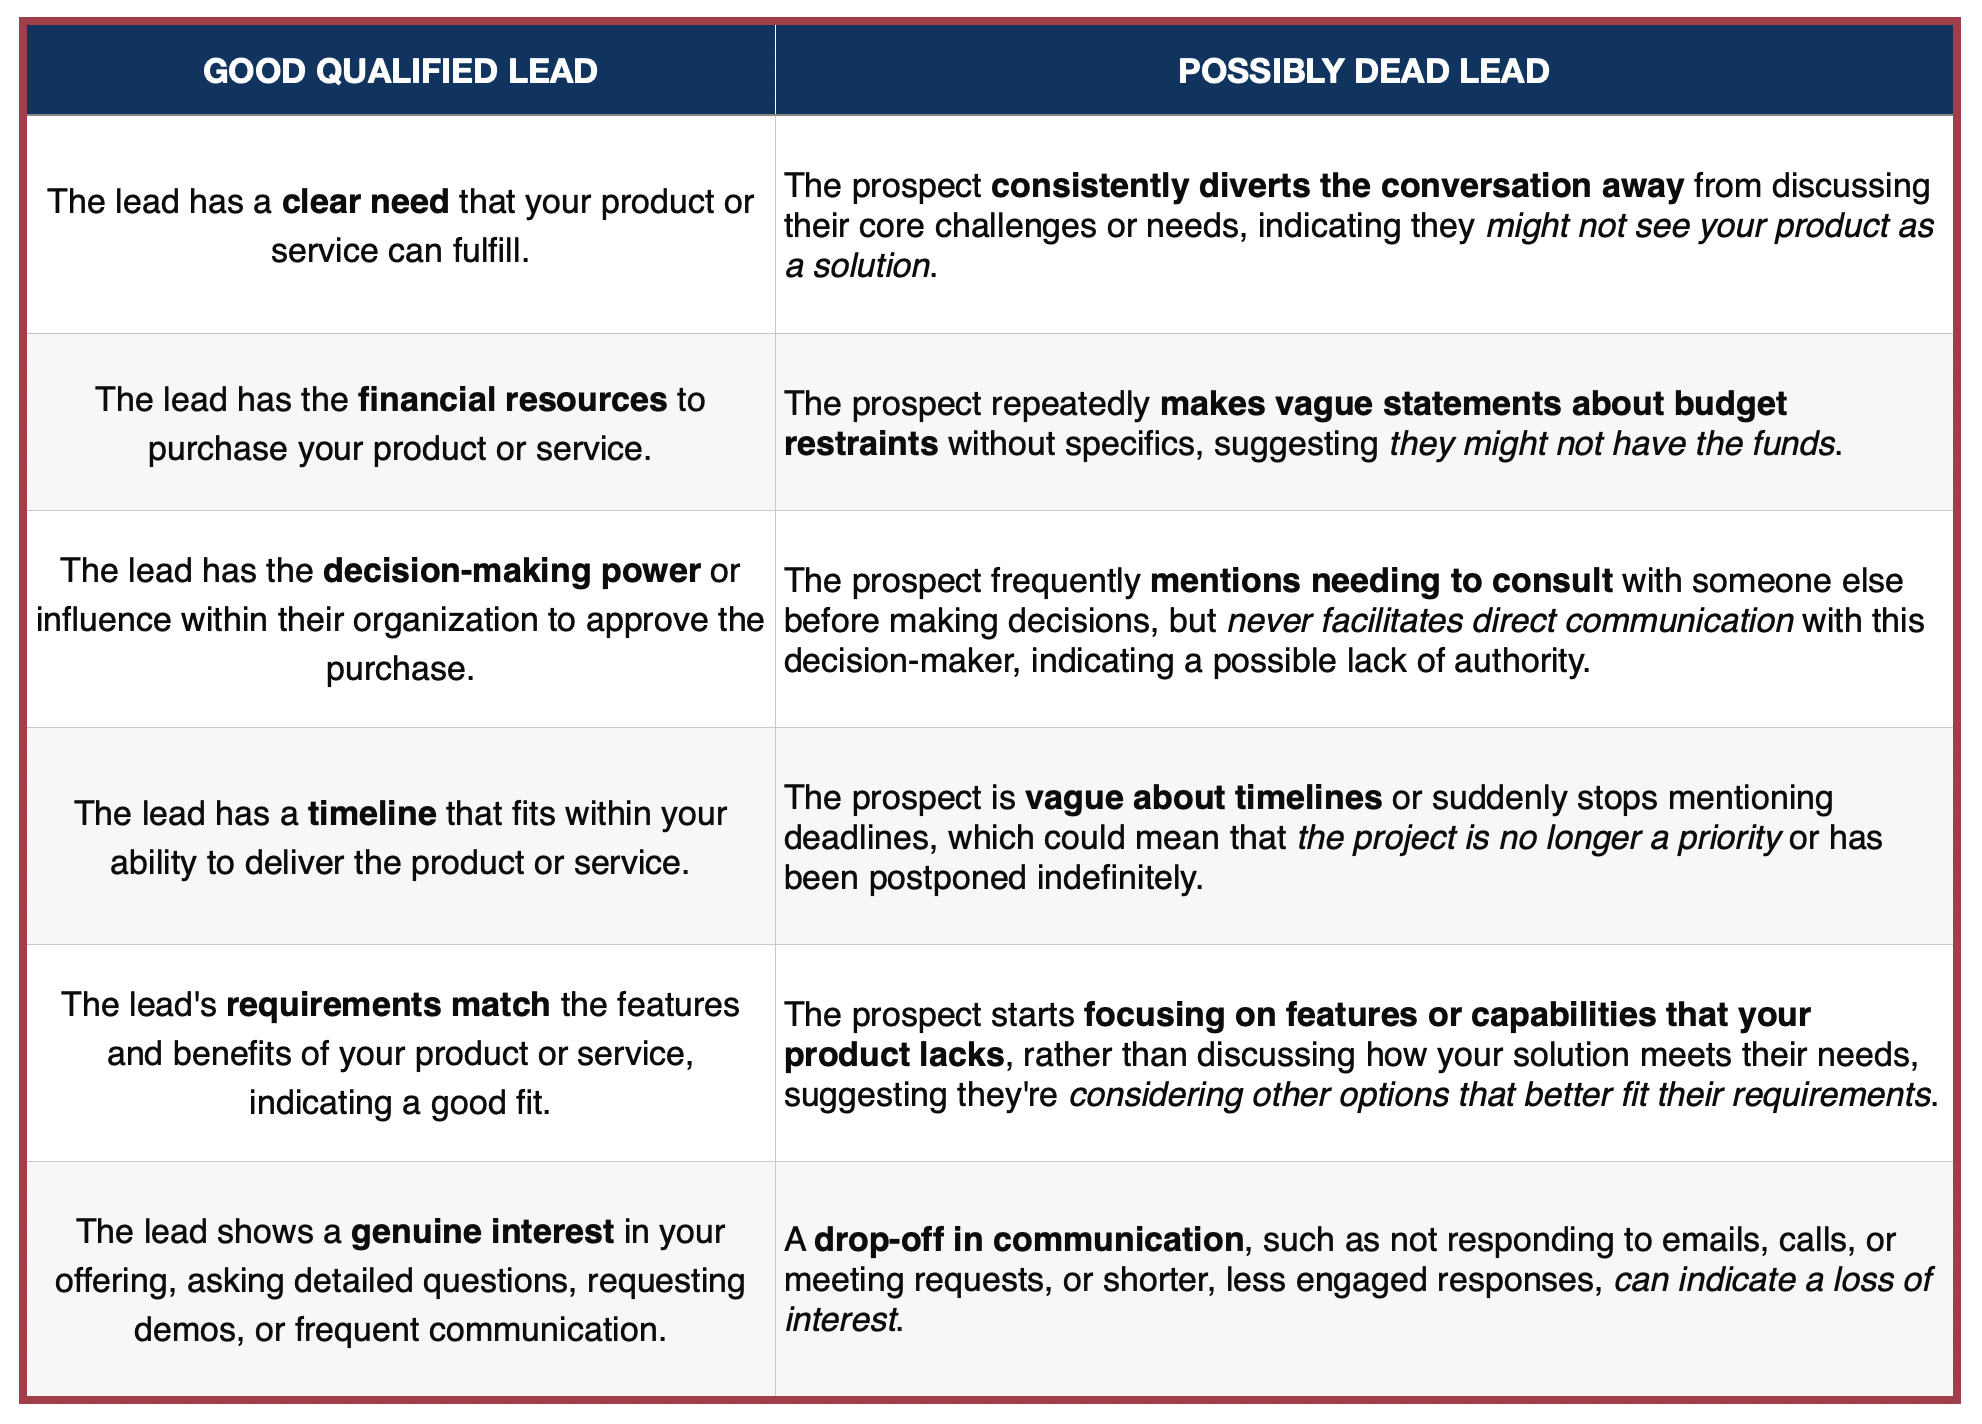 chart comparing good leads and possibly dead leads to illustrate sales opportunities